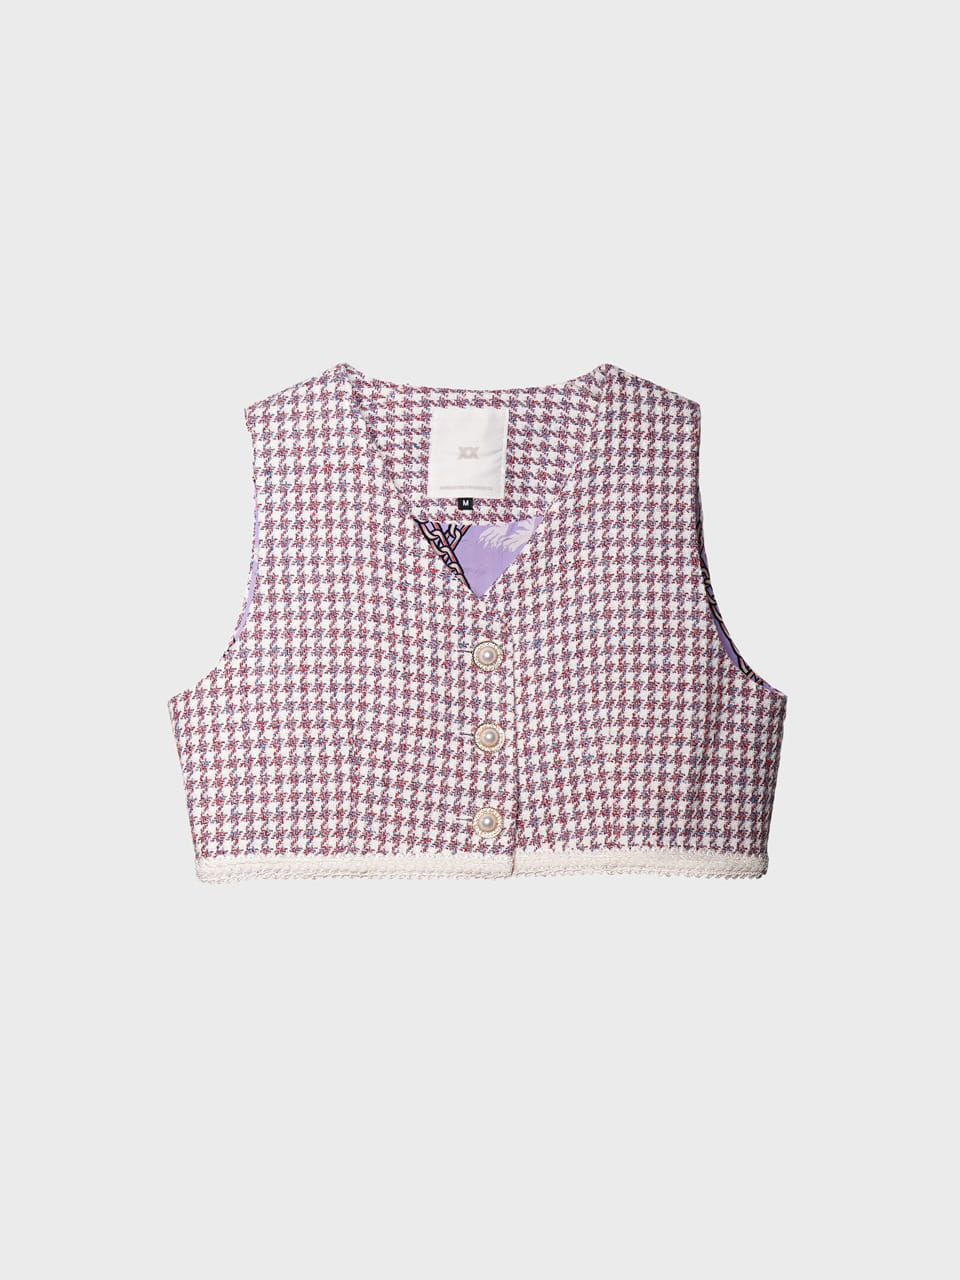 Houndstooth-Check Tweed Cropped Top